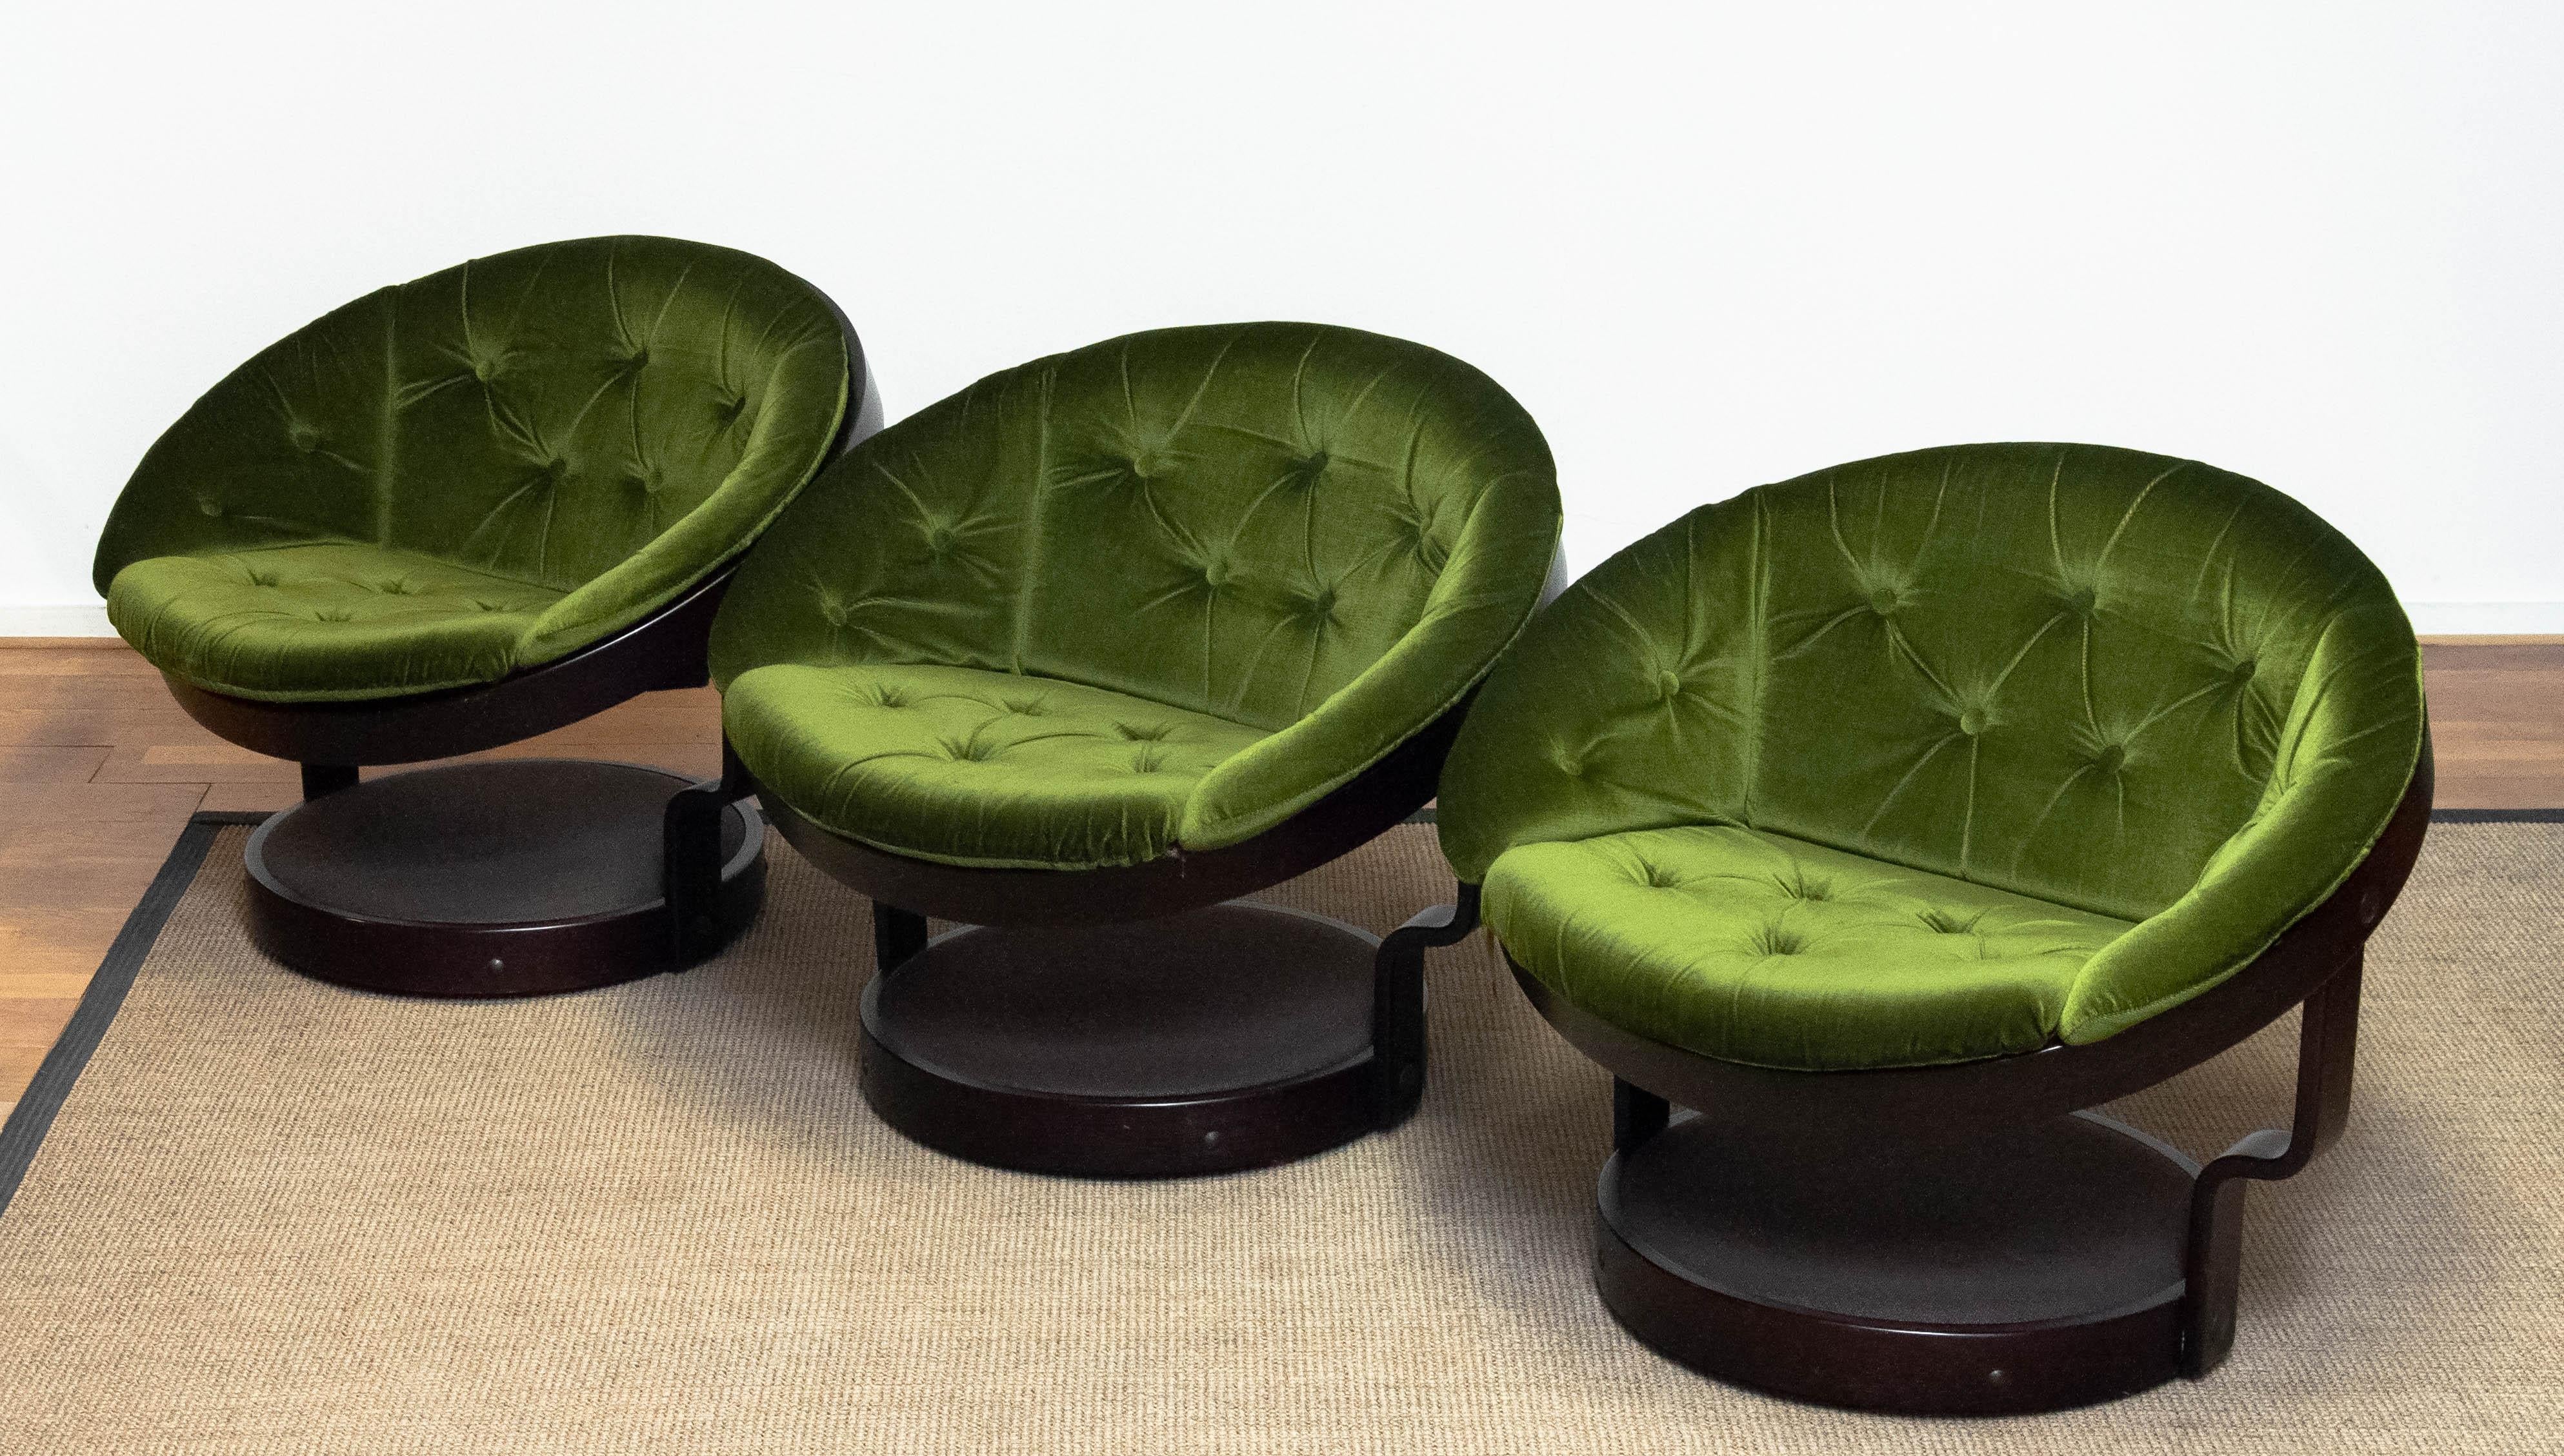 Beautiful set of three Scandinavian modern bentwood ' model Convair' swivel lounge chairs by Oddmund Vad for VAD Trevarefabrik in Norway. Featuring a floating circular bentwood frames and floor stand with tufted green velvet fabric cushions. These